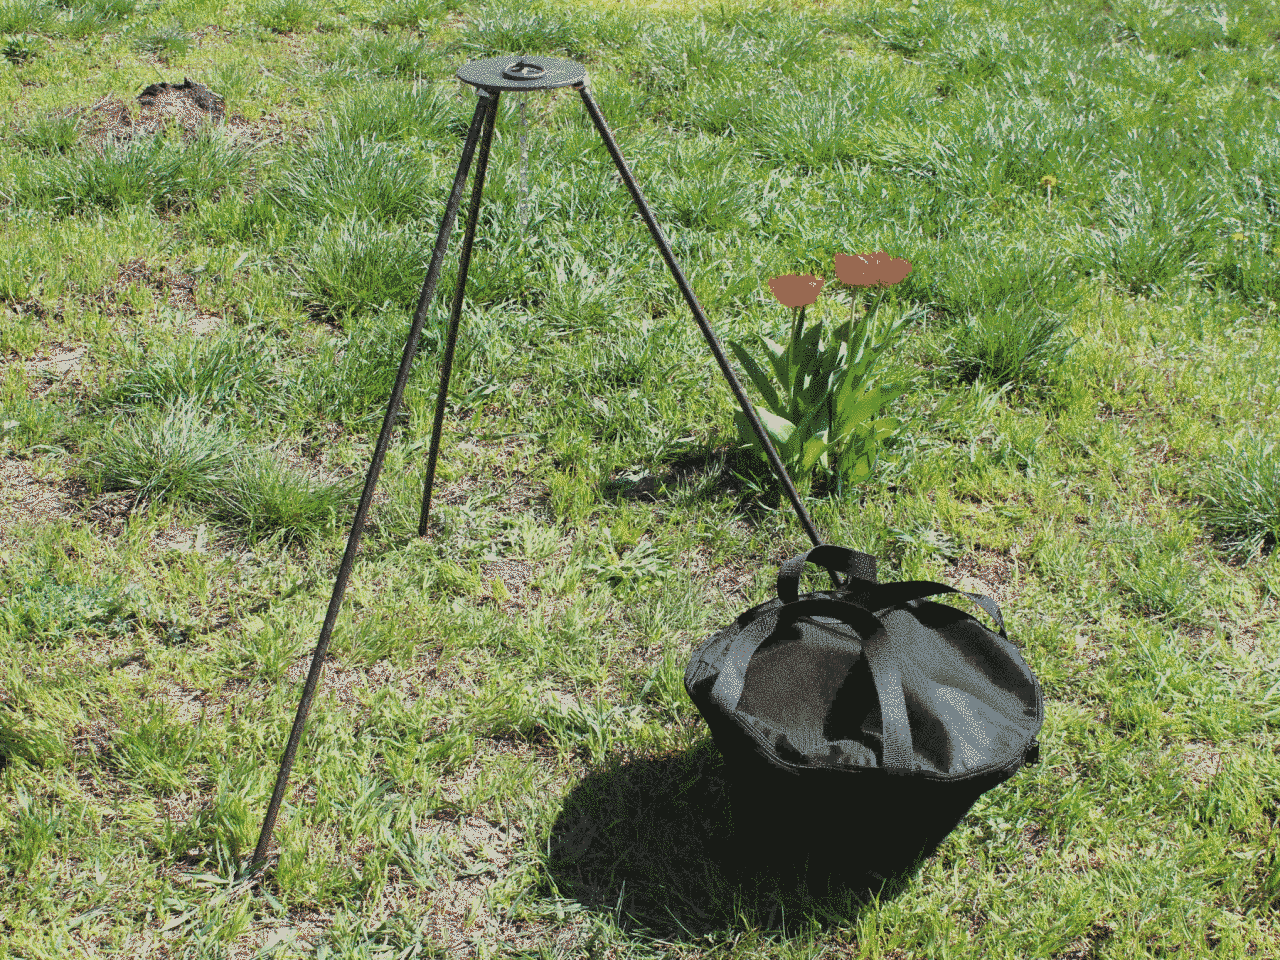 Cast iron asian cauldron 15 L WITH A GRILL LID-FRYING PAN, a bag and a tripod